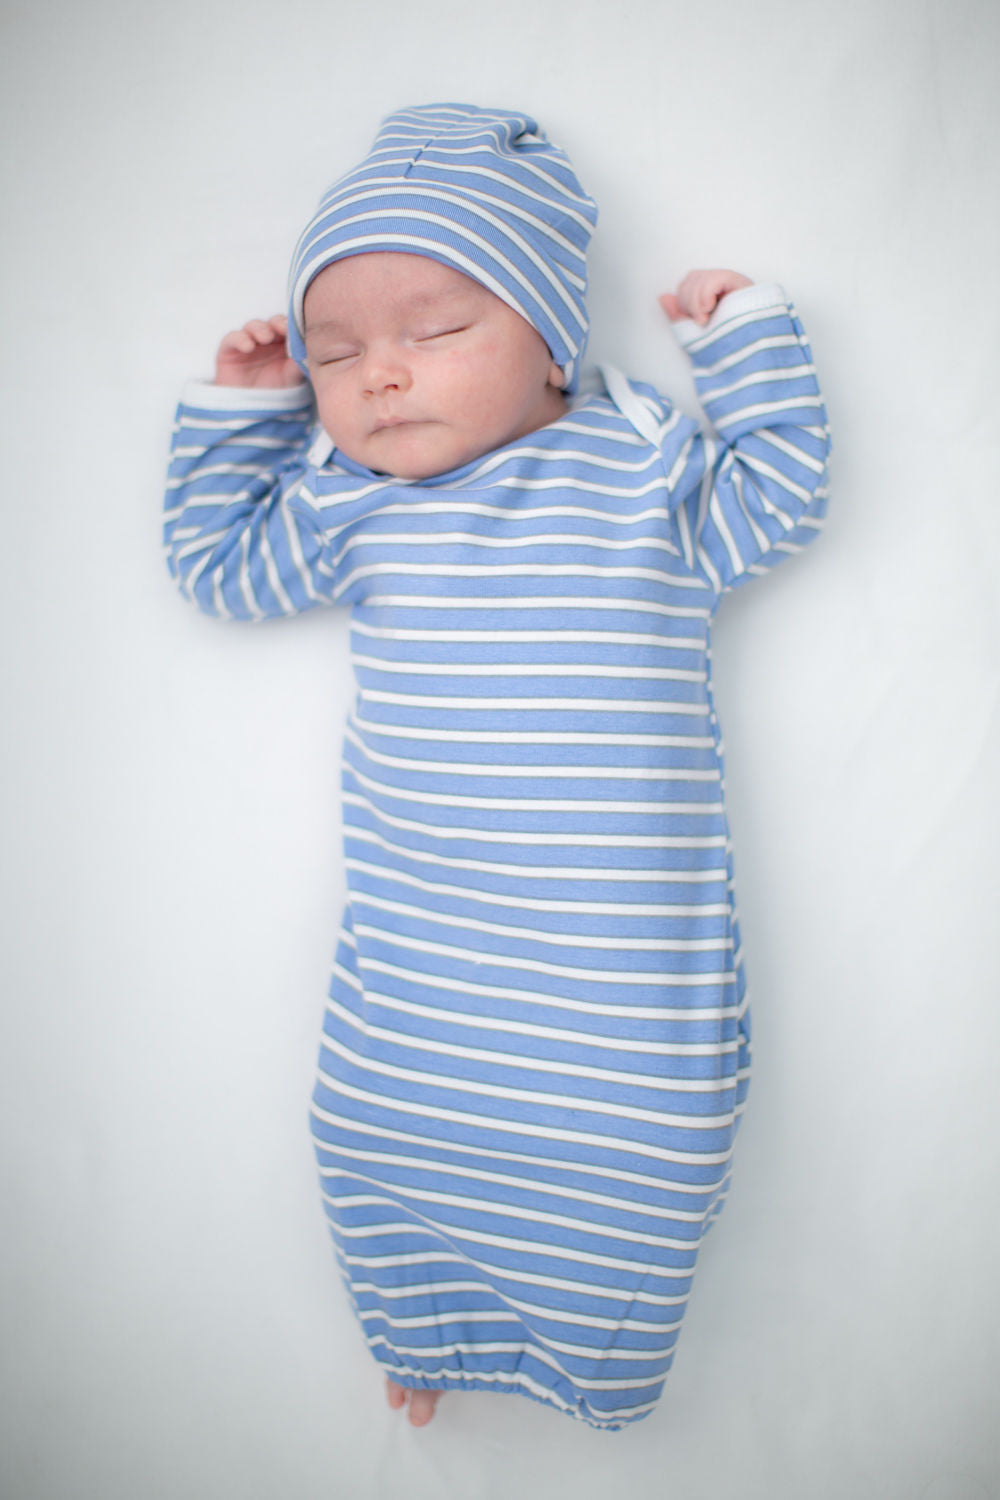 newborn gown and hat